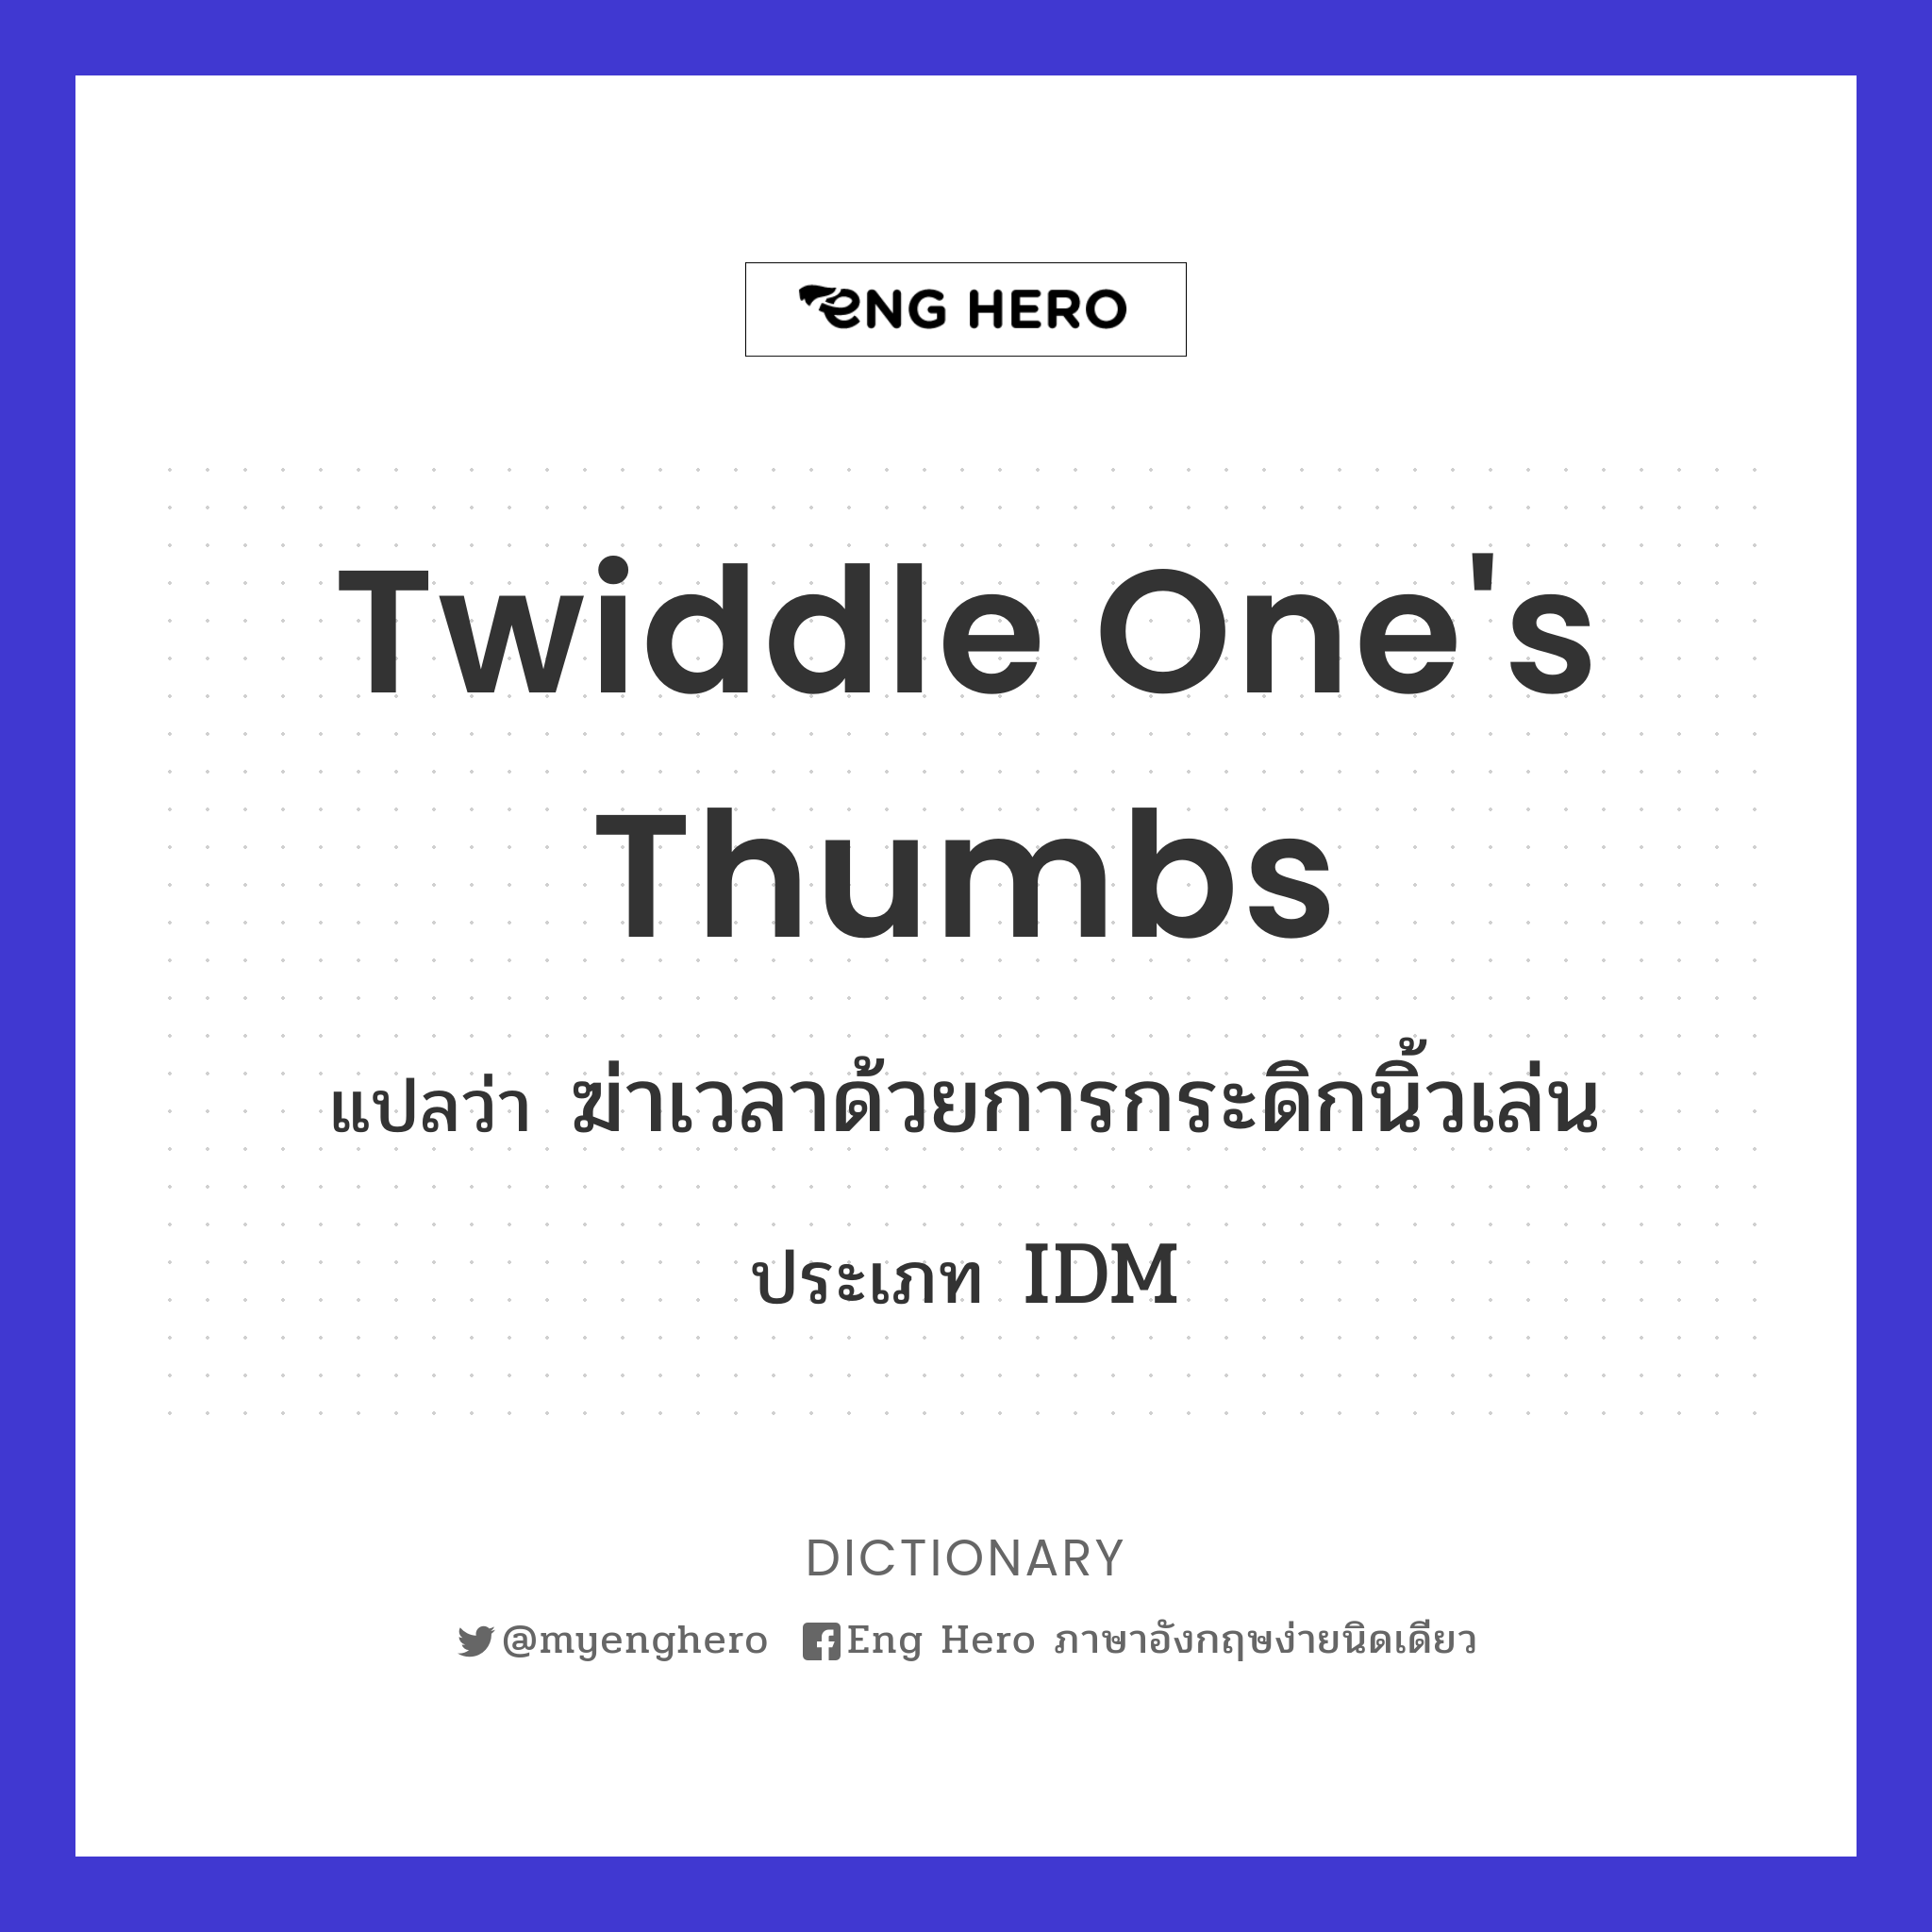 twiddle one's thumbs